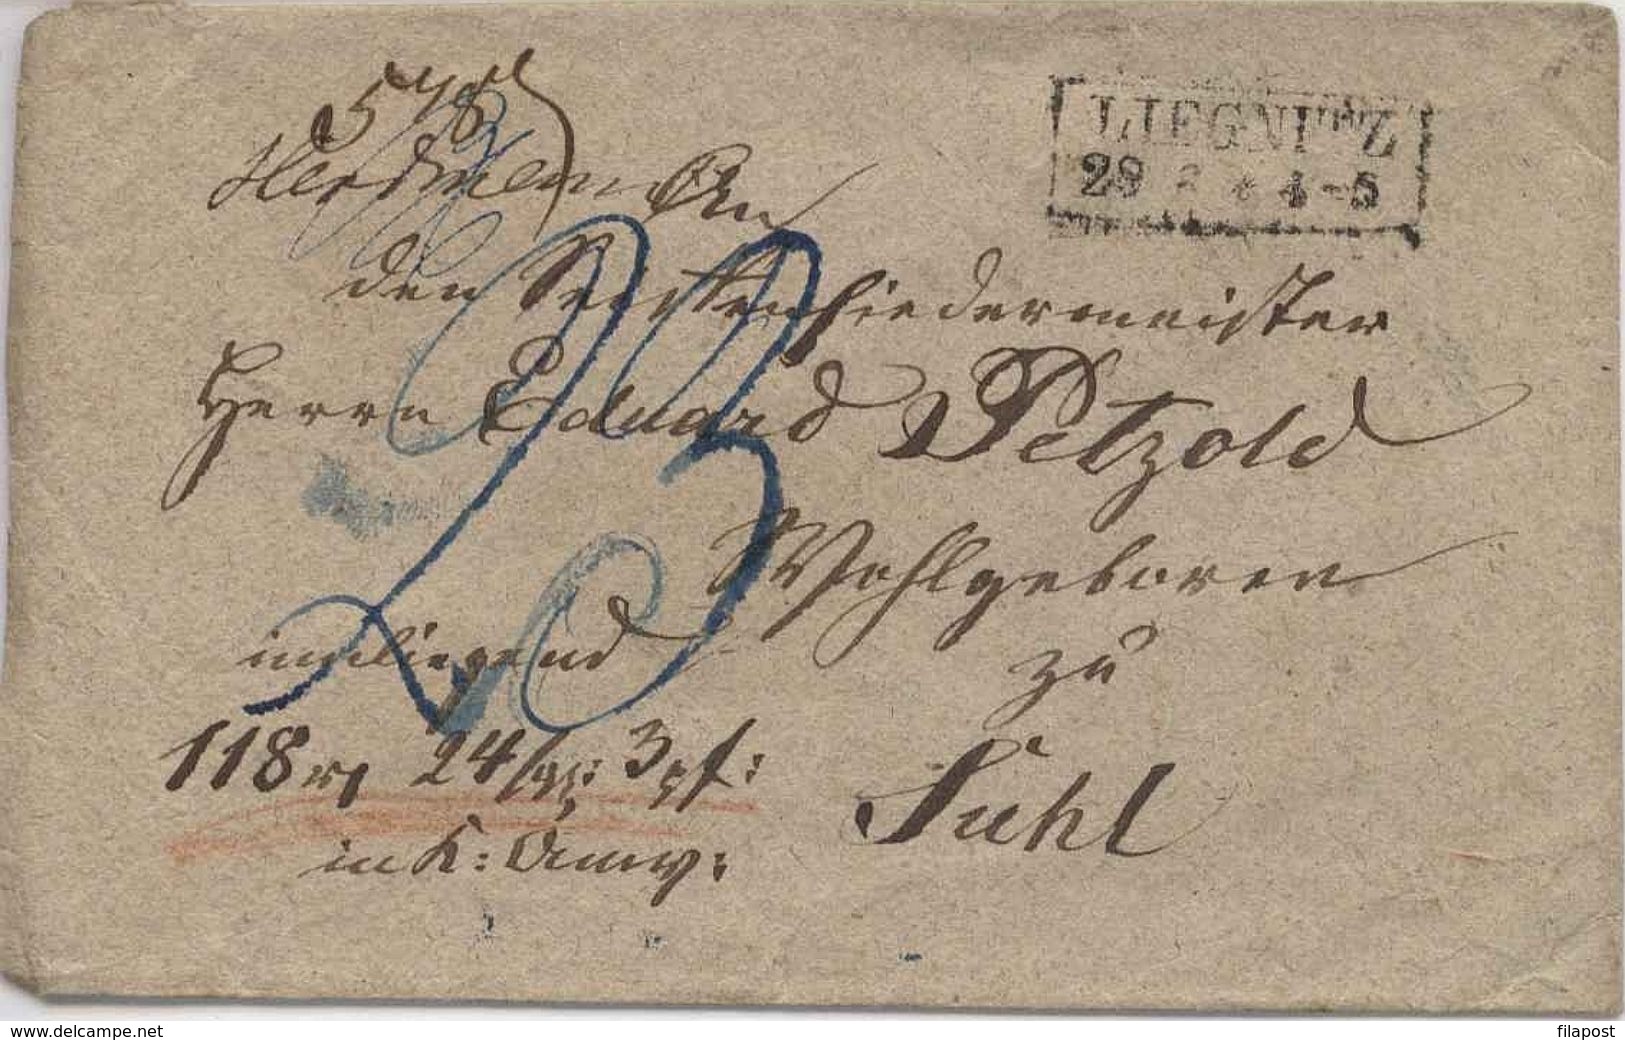 Poland 1828, Letter From Liegnitz - Legnica To Suhl Valuable Letter W301. - ...-1860 Voorfilatelie